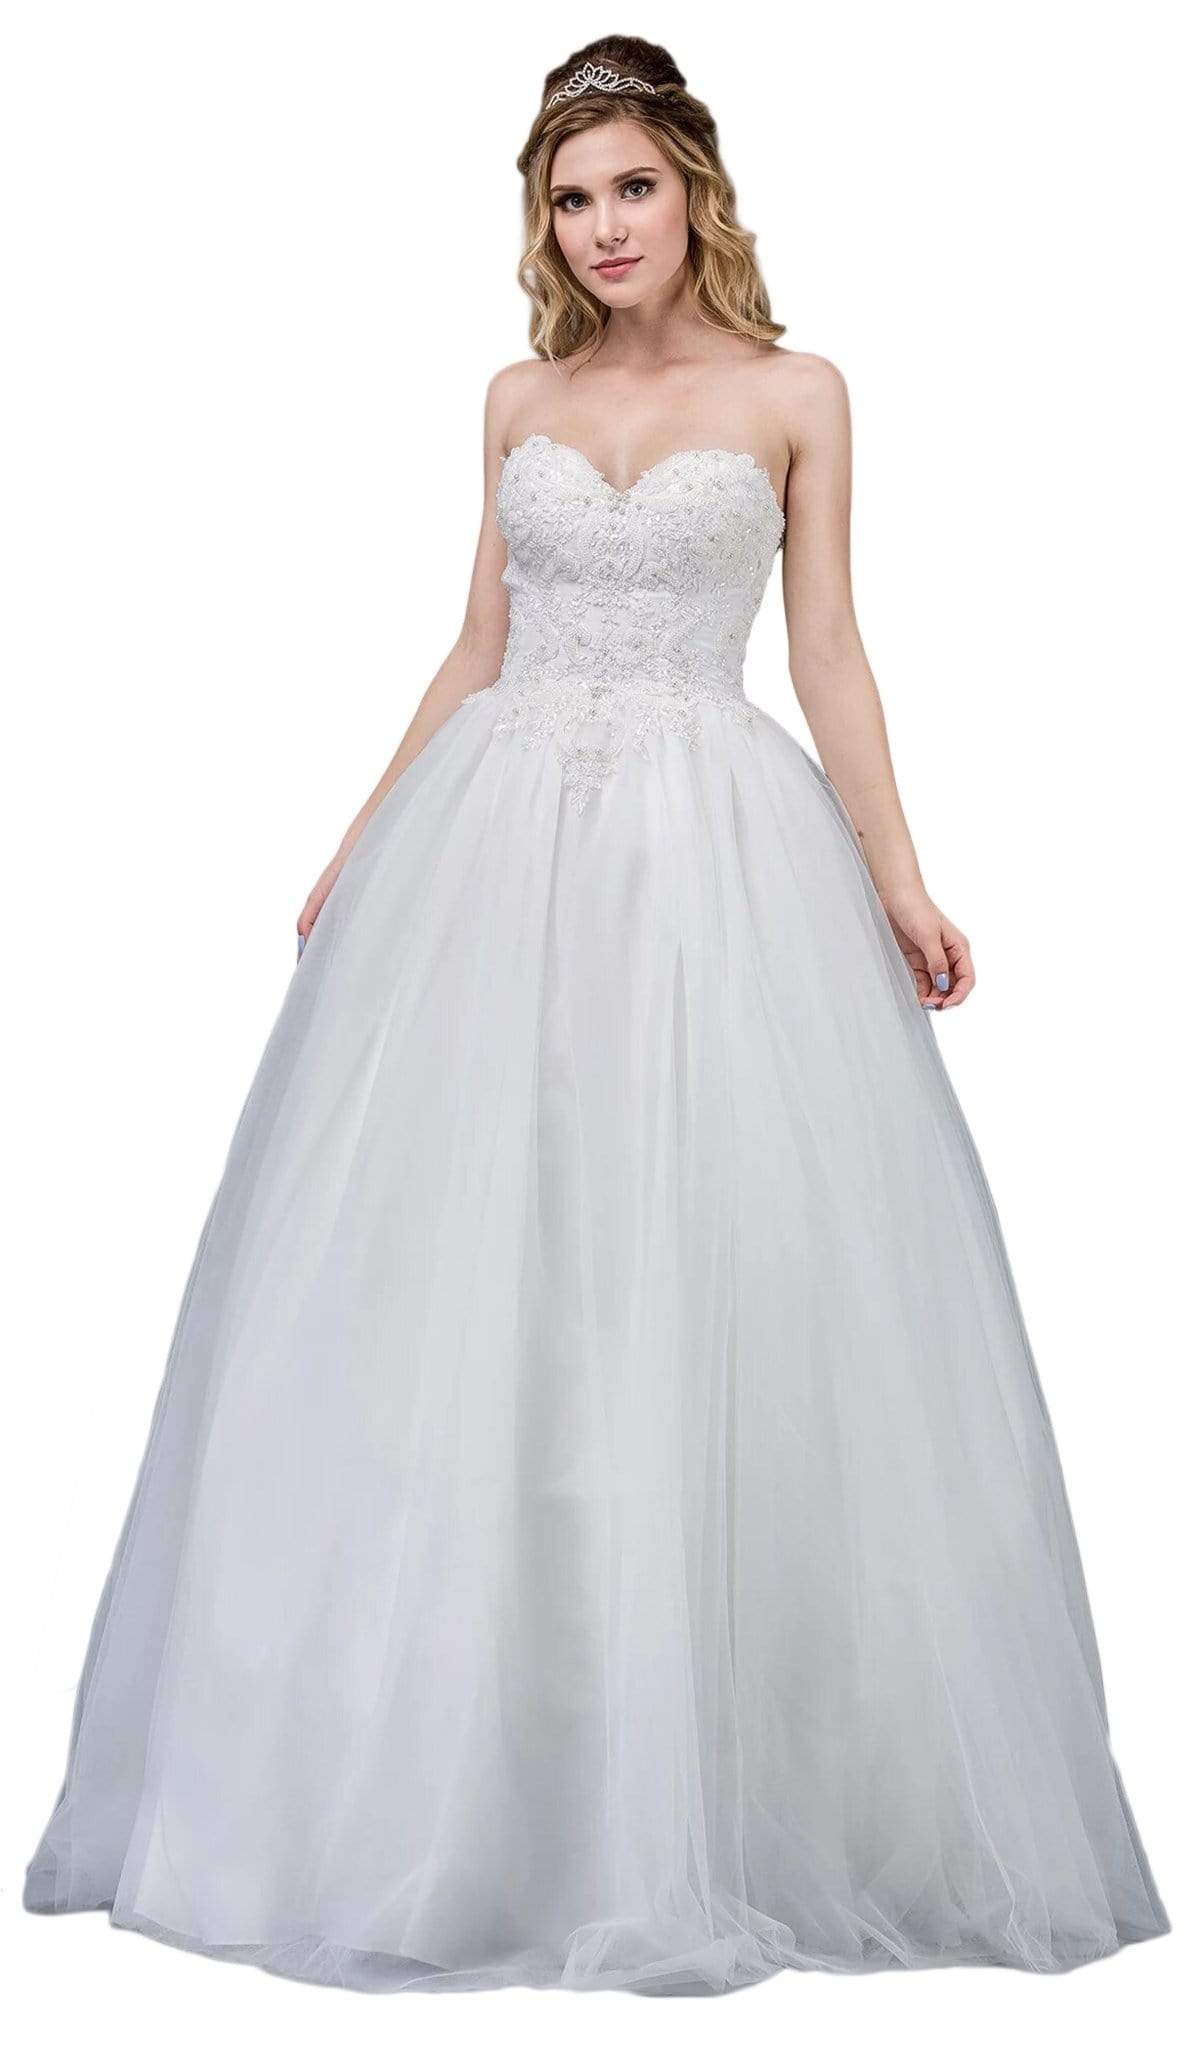 Dancing Queen Bridal - 65 Embellished Strapless Sweetheart Ballgown ...